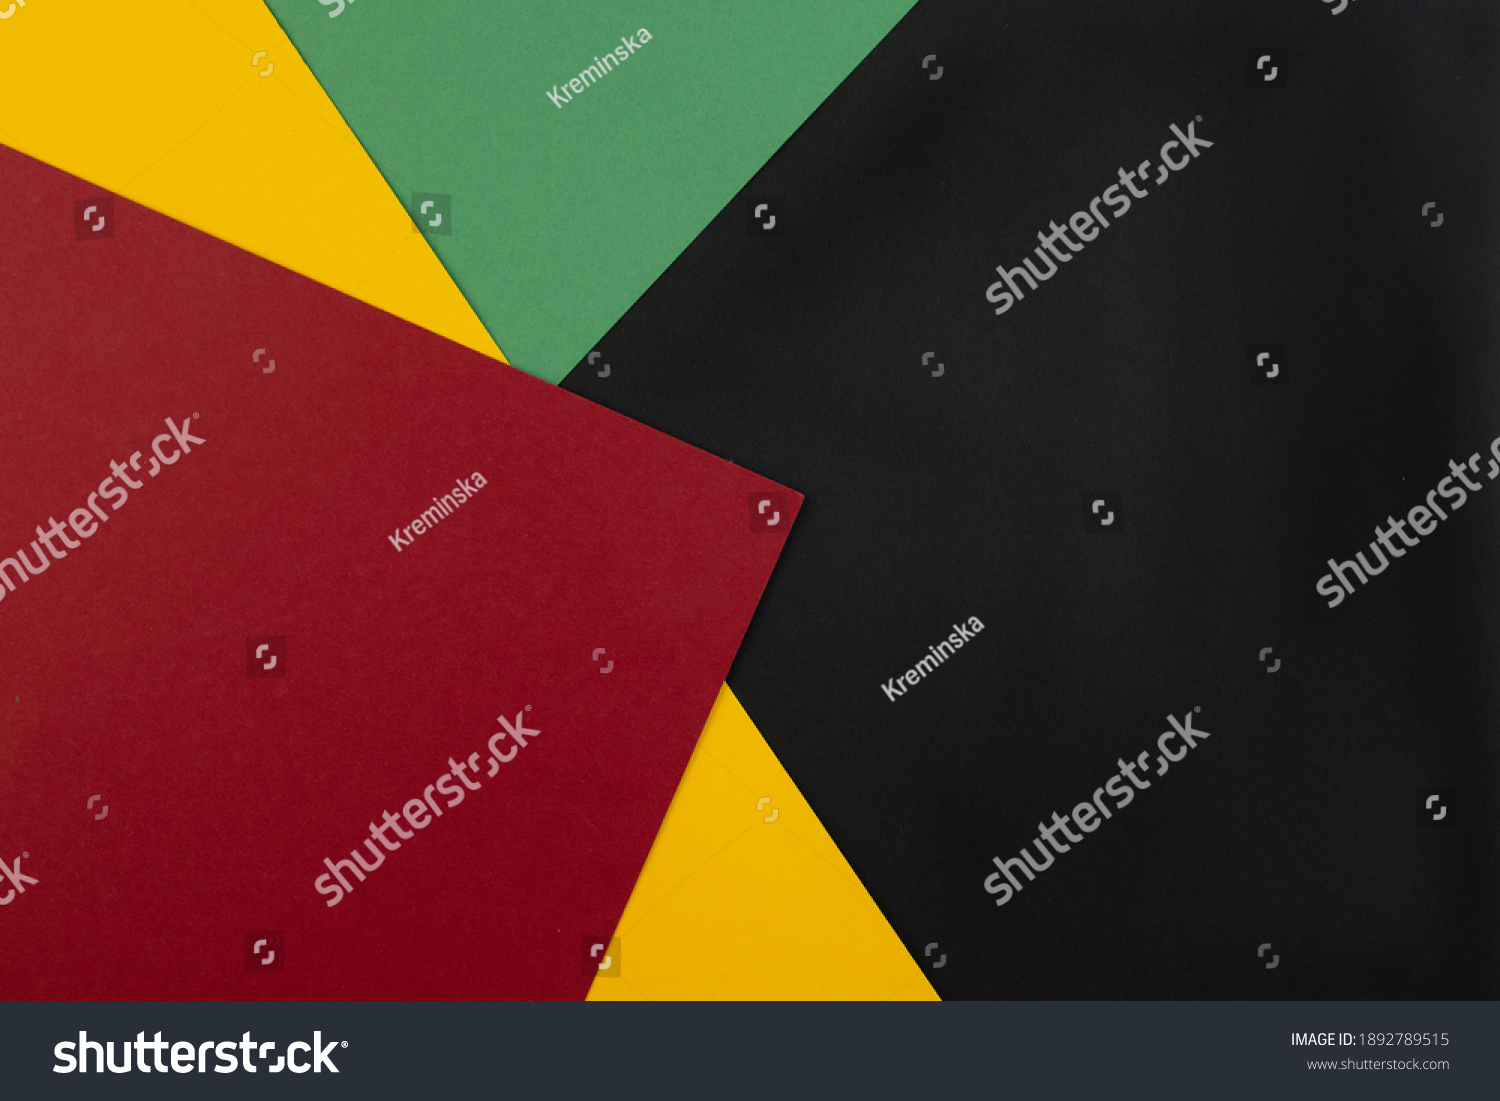 February Black History Month. Abstract Paper geometric black, red, yellow, green background. Copy space, place for your text. Top view. #1892789515